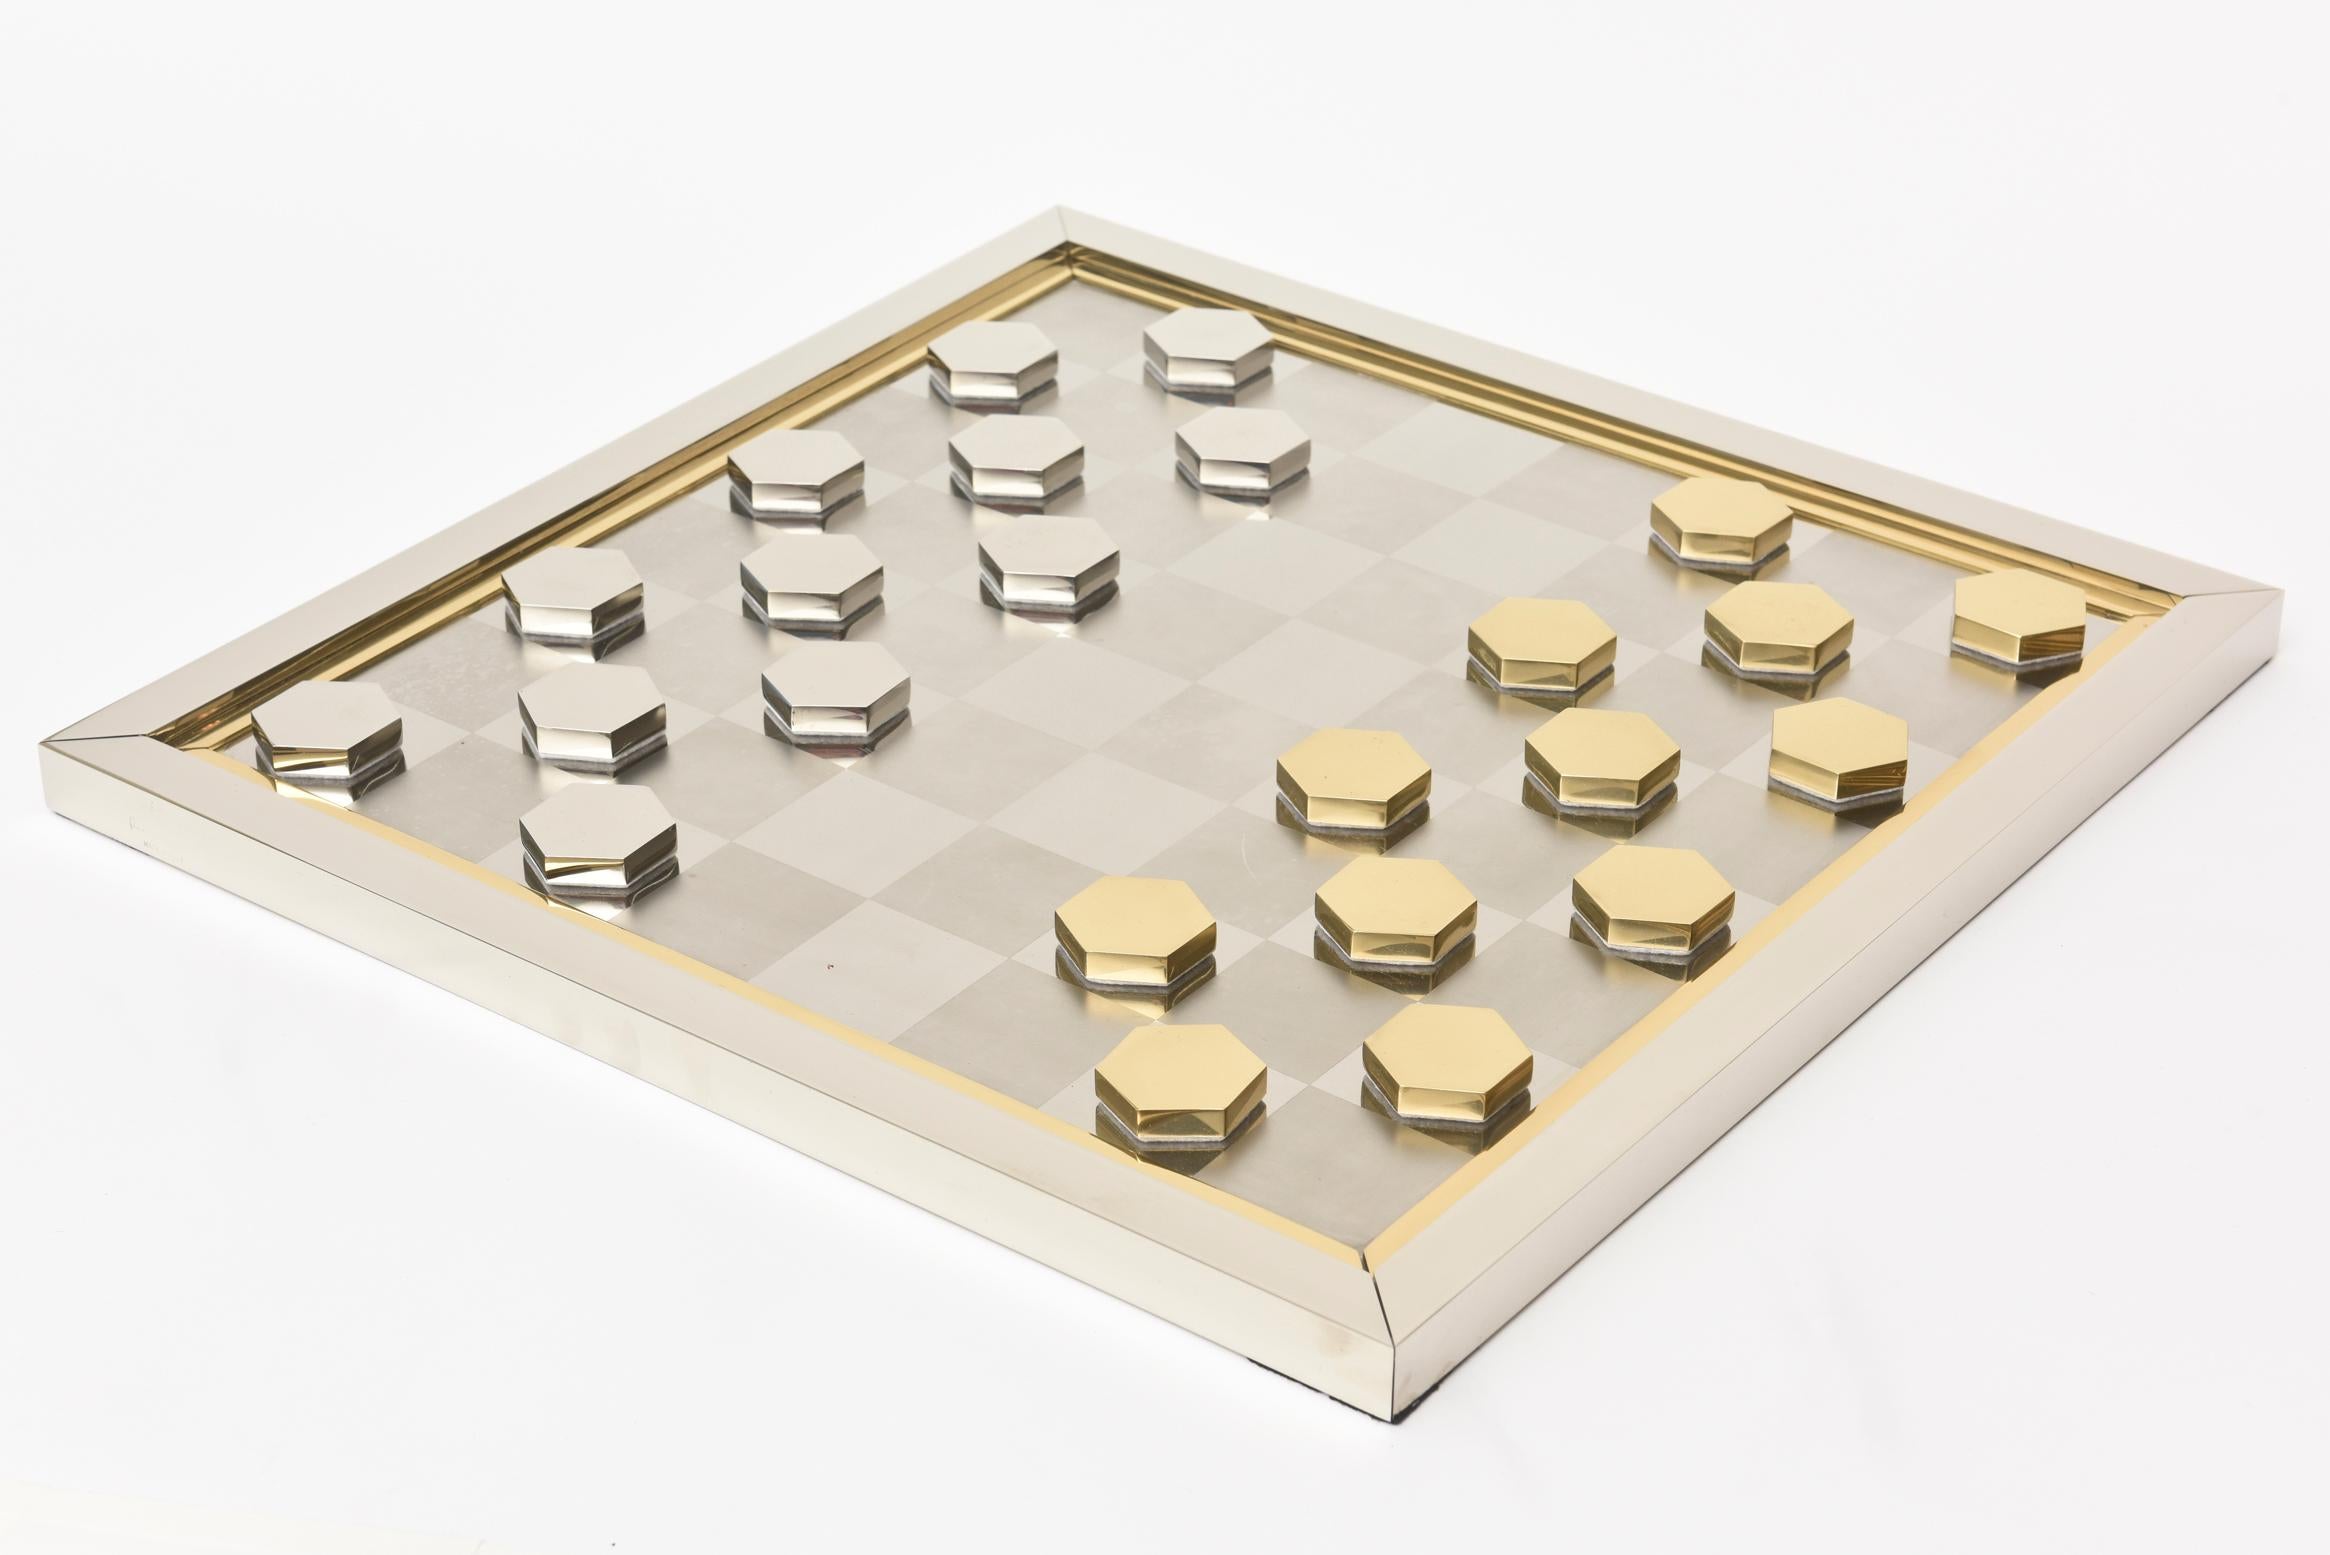 This ultra chic and modern signed Italian Romeo Rega vintage checkers game has sculptural components. It is great just even as a decorative object or for real playing the game of checkers. It is from the 1970s. The board is square with a brass inner